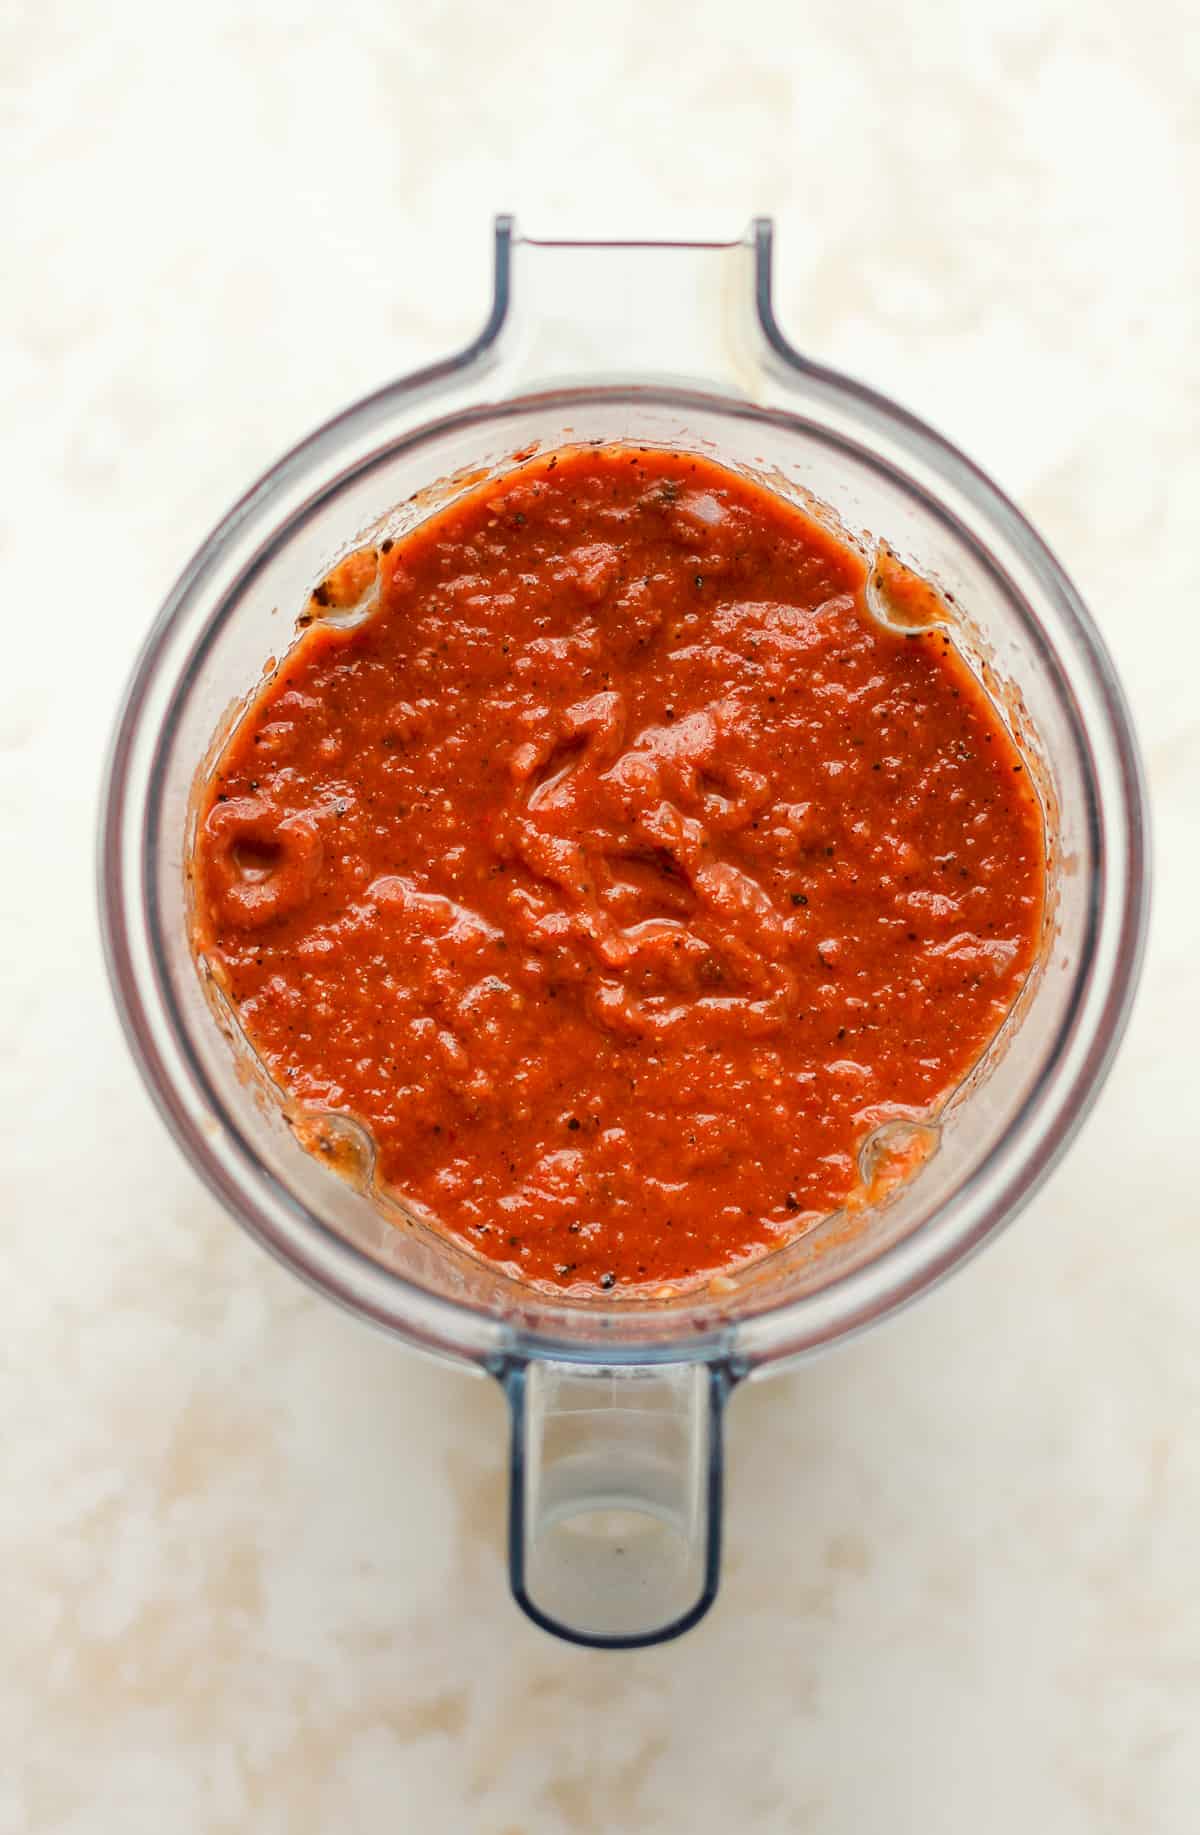 A blender of the sauce after pulsing.